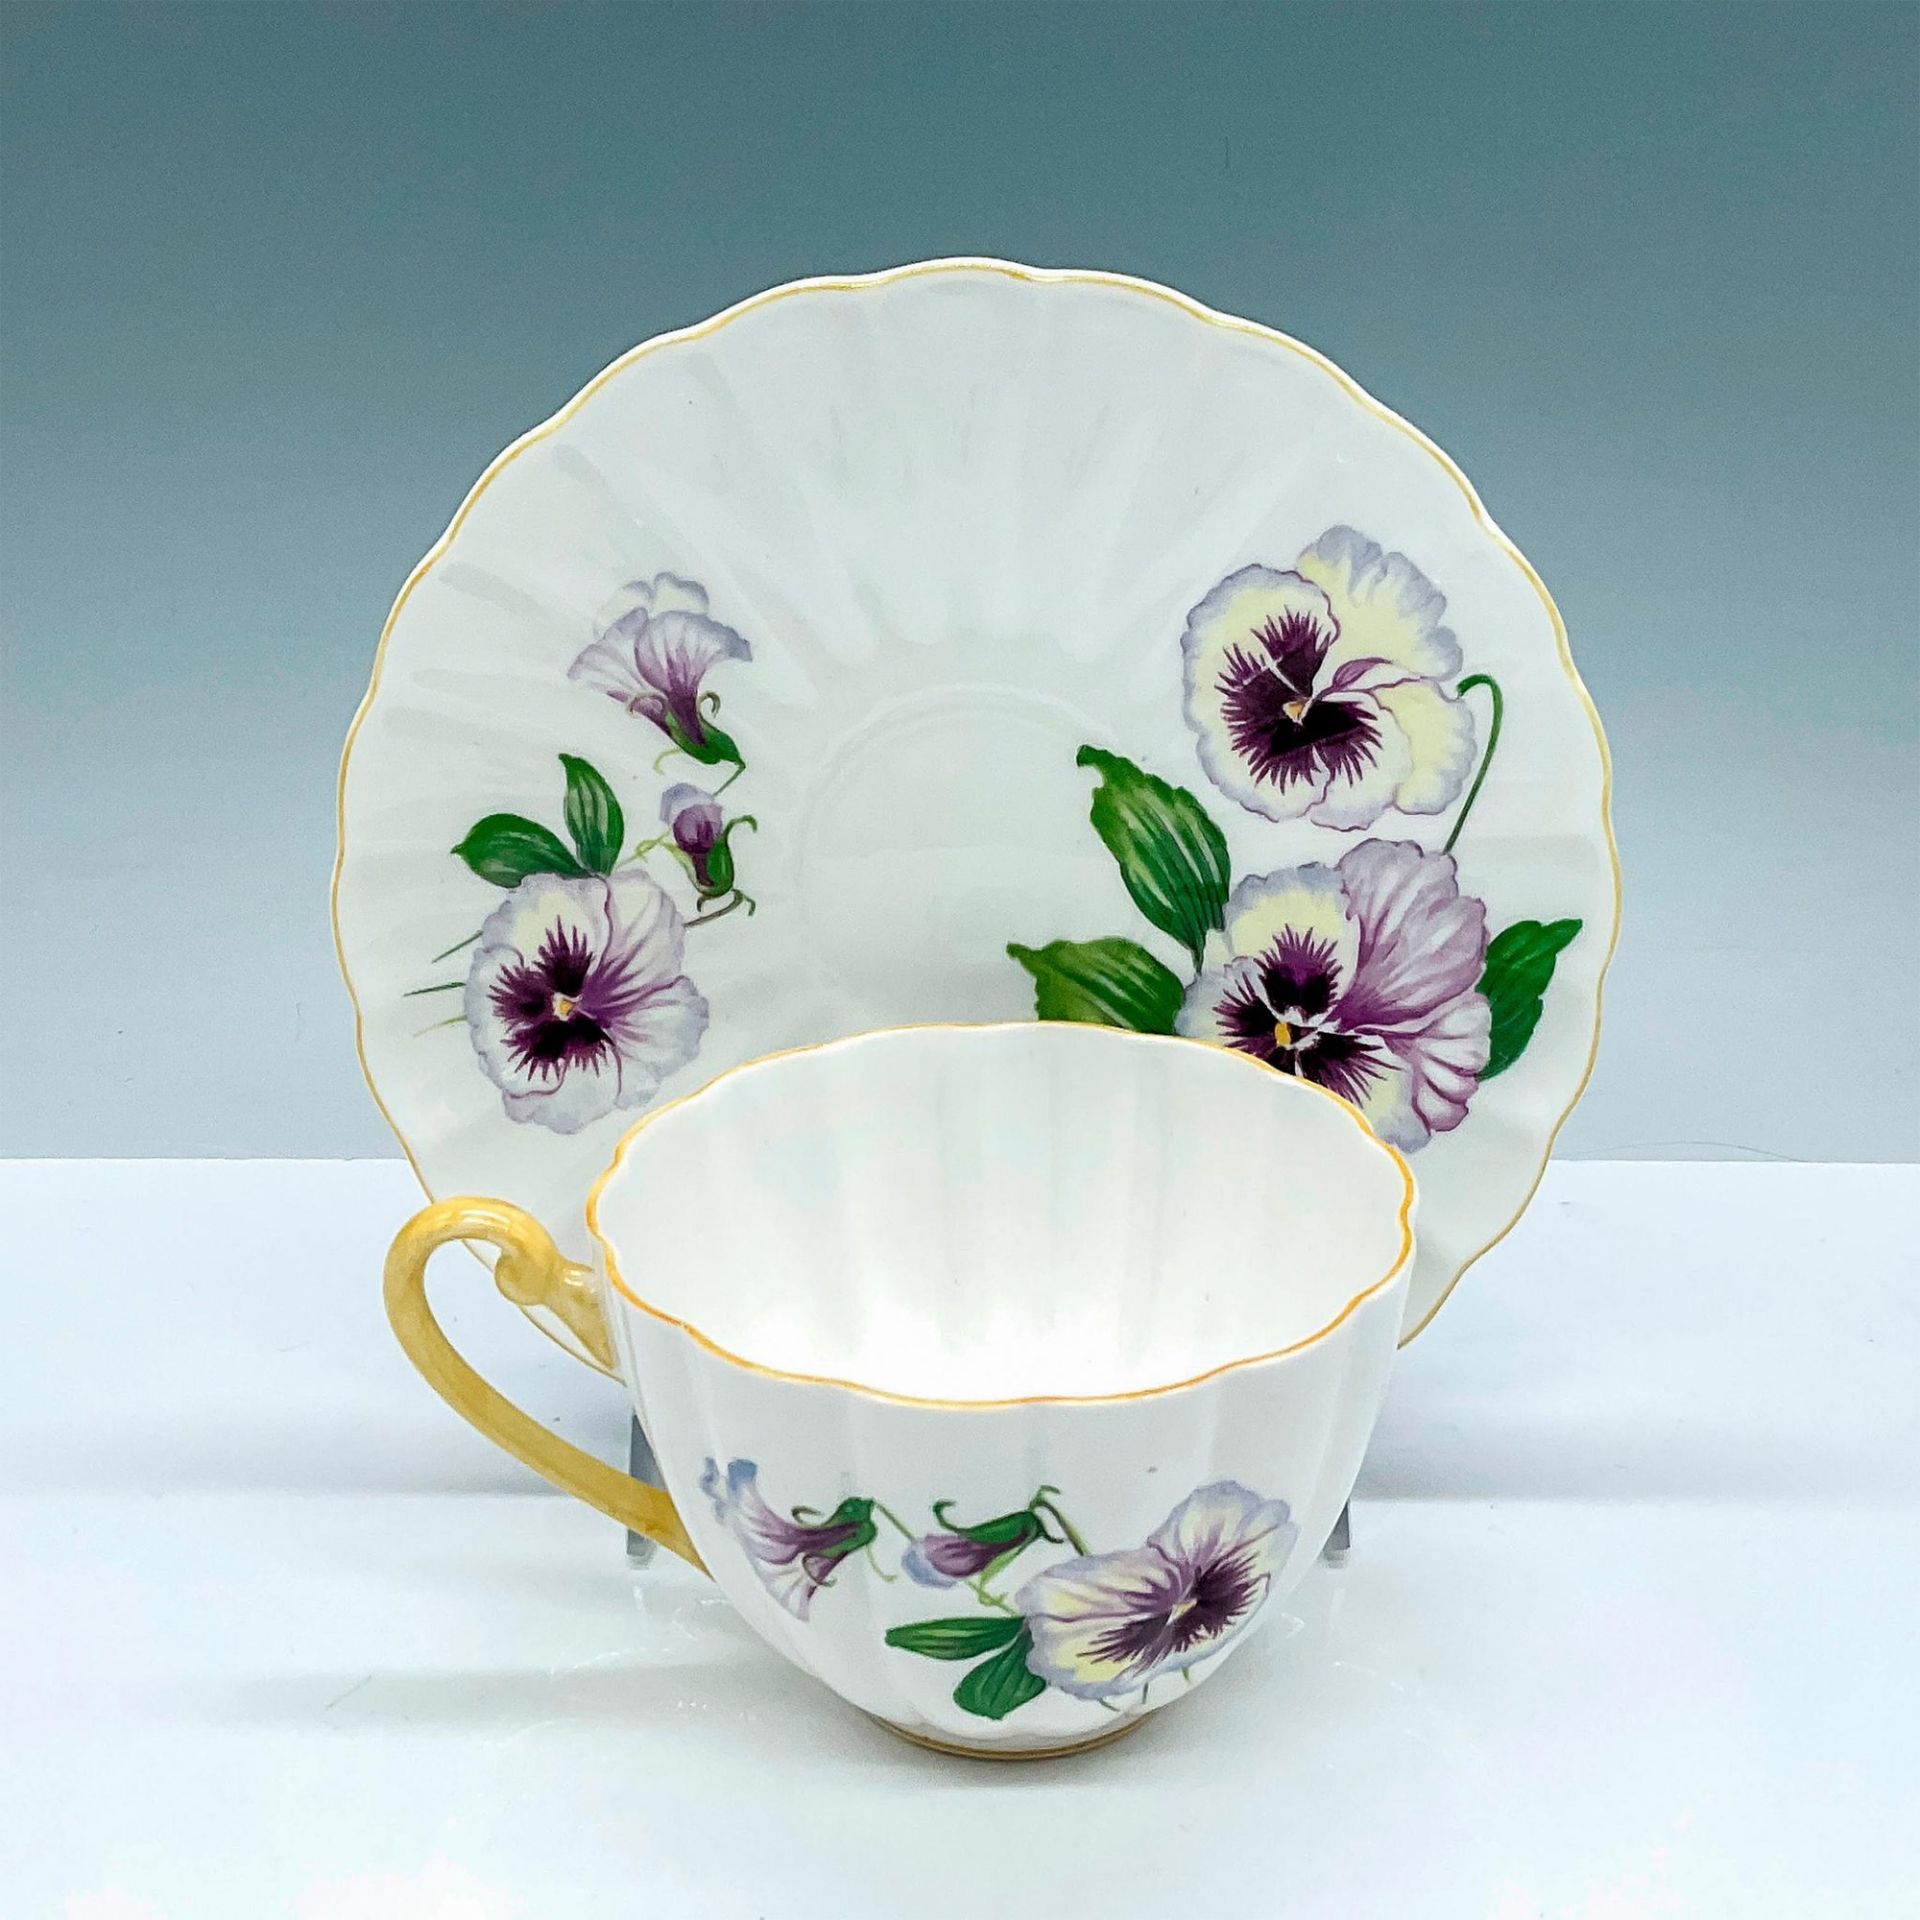 Shelley China Teacup and Saucer Set, Pansy - Image 2 of 3